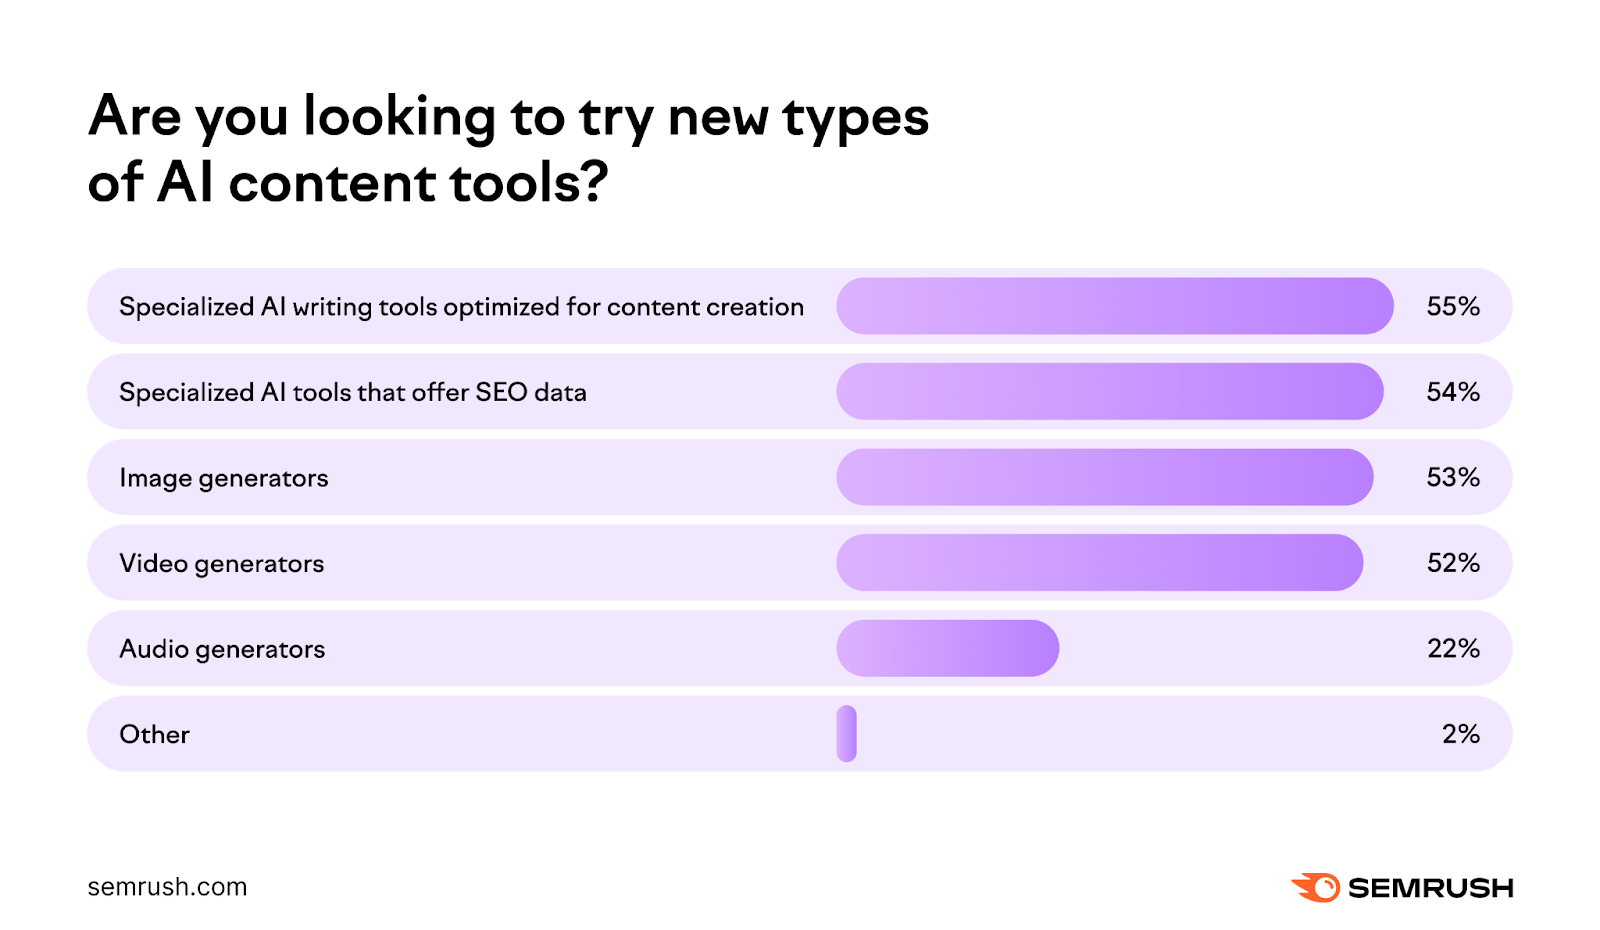 AI Content Marketing Report results on trying new types of AI content tools